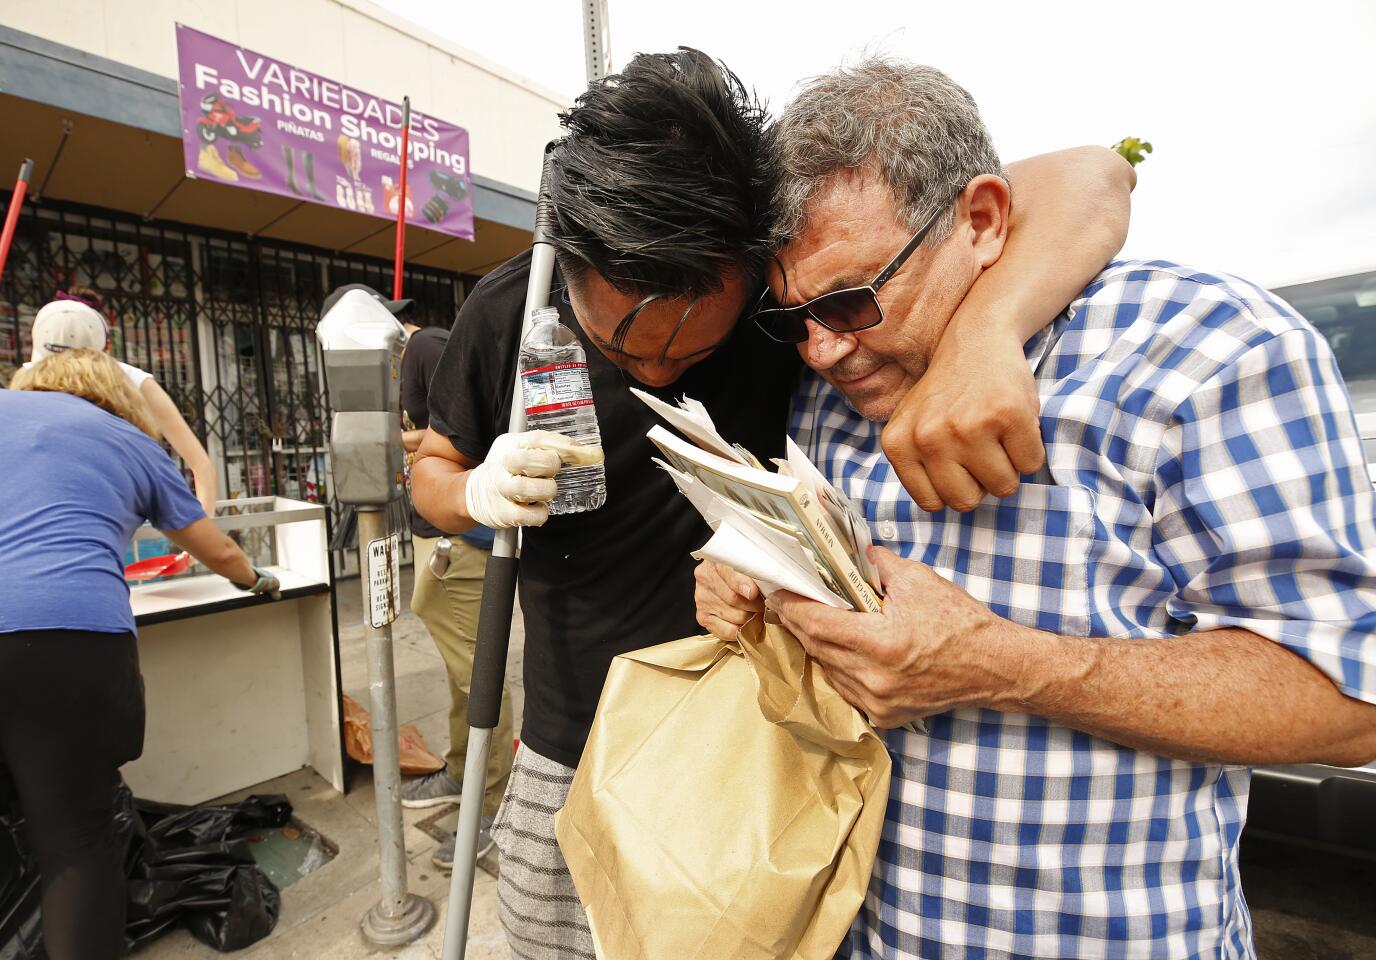 Ibn Kadalim hugs shop owner Larry Contreras during the clean-up.